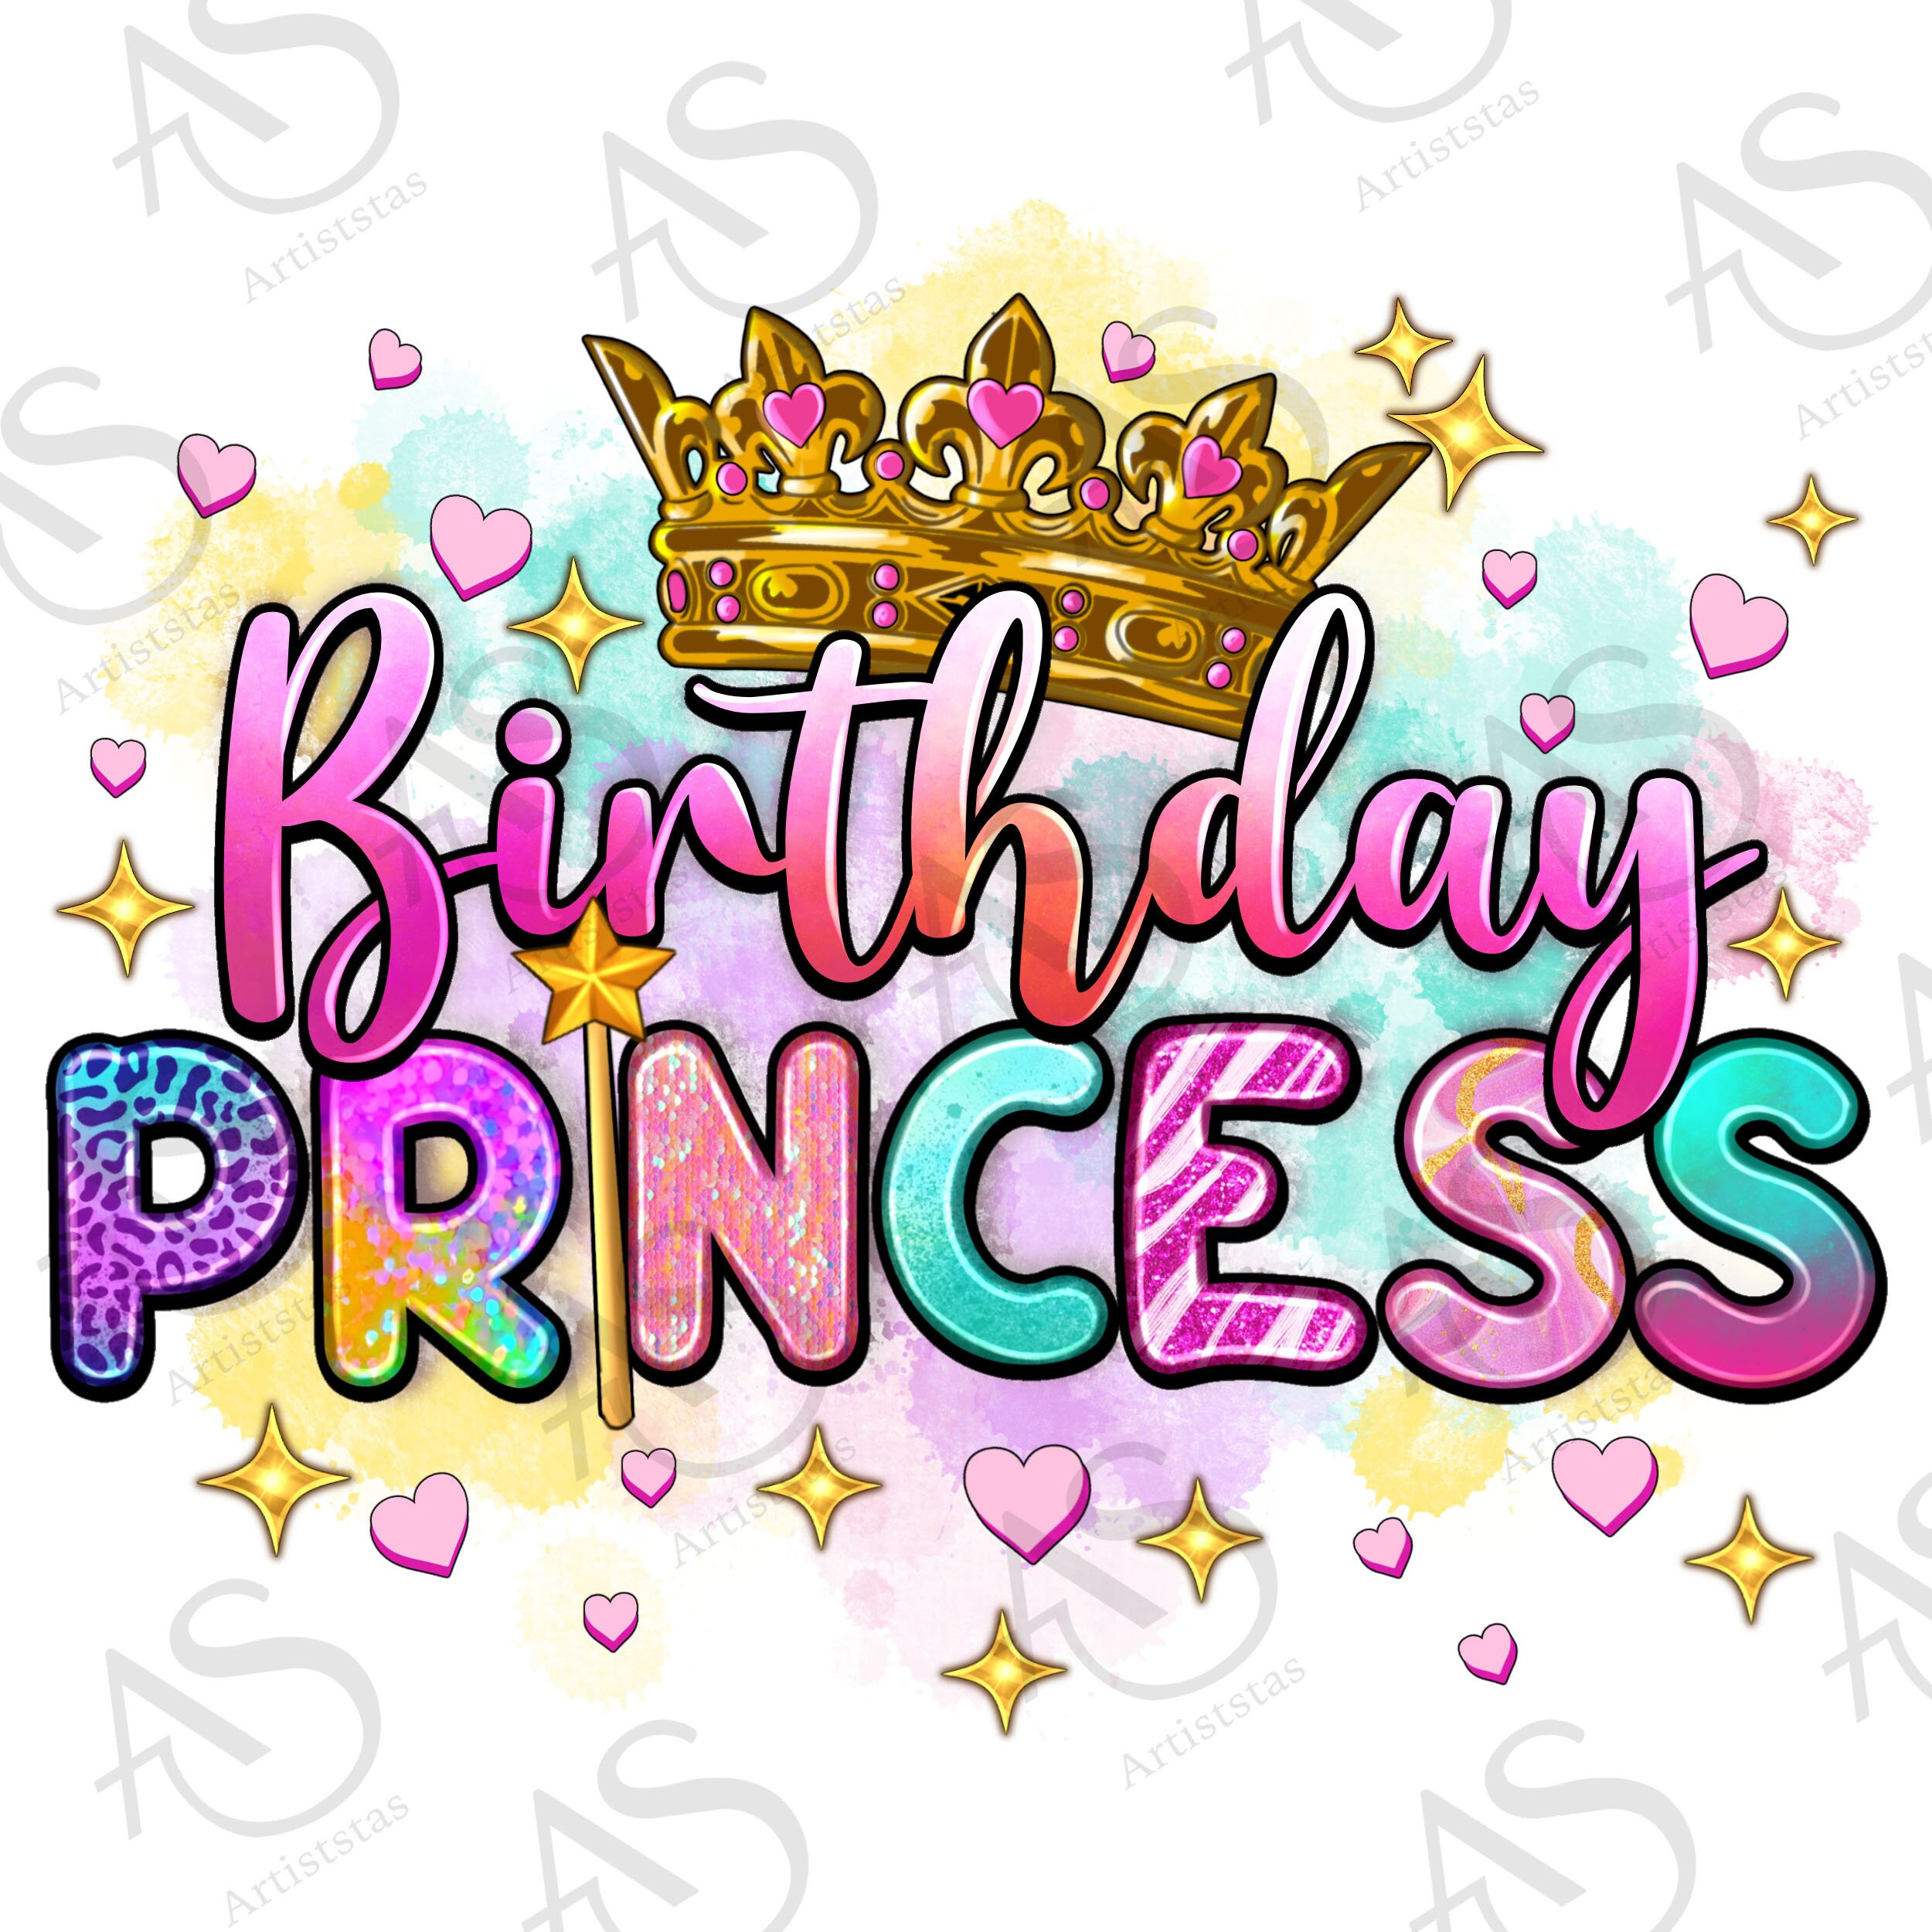 Birthday Girl Png Instant Download, Happy Birthday Png Sublimation Designs,  Digital Prints for Birthday Shirt, Png File for T-shirts -  Finland